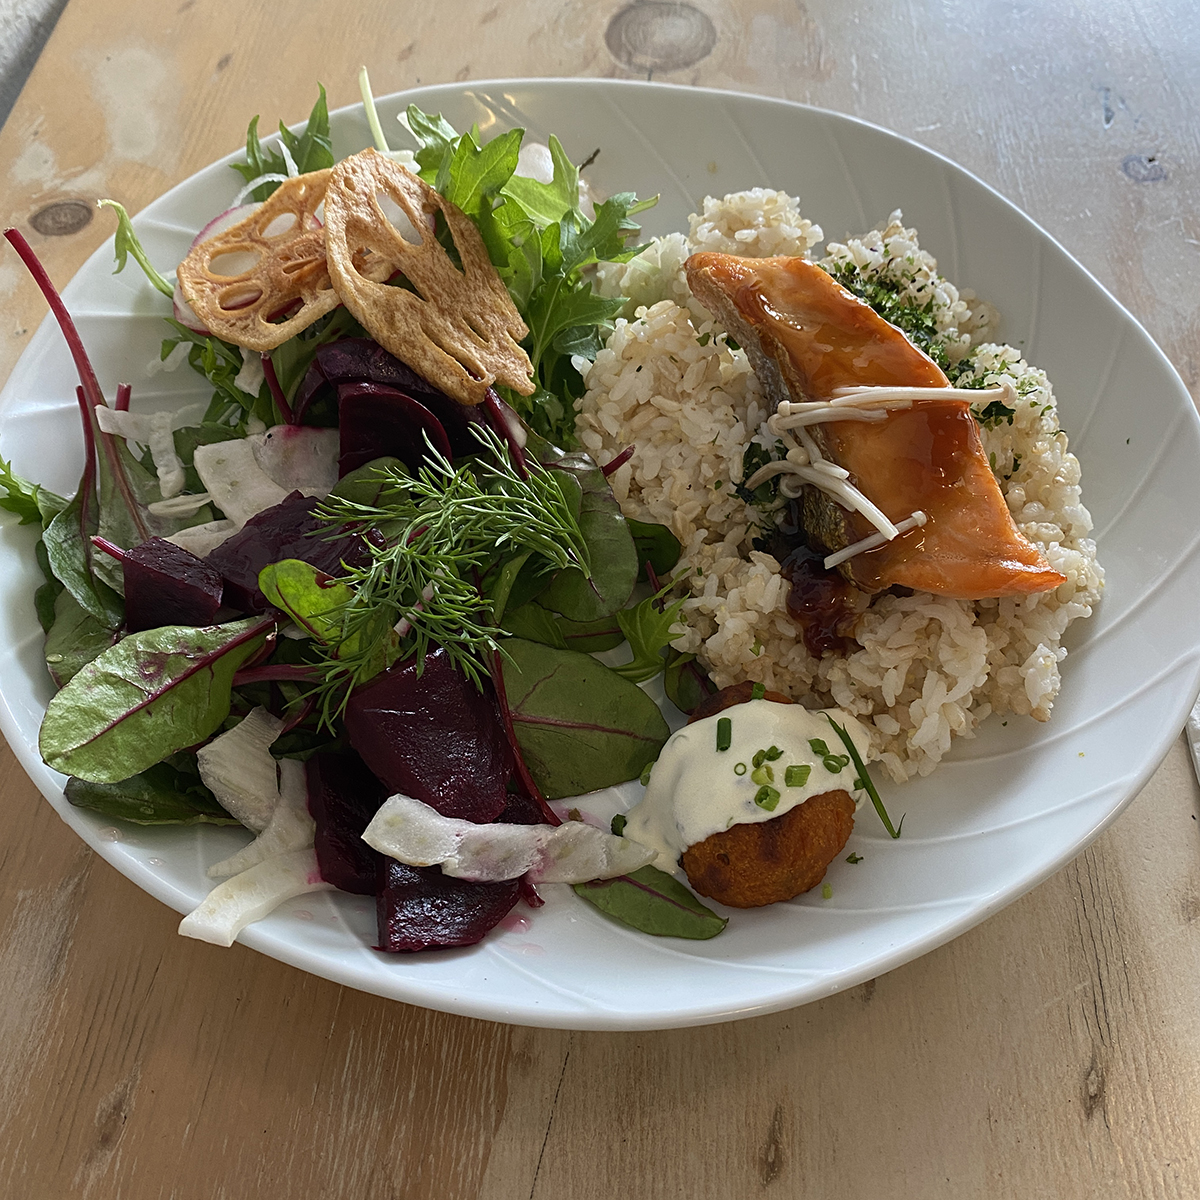 CIBI lunch plate - another healthy food cafe